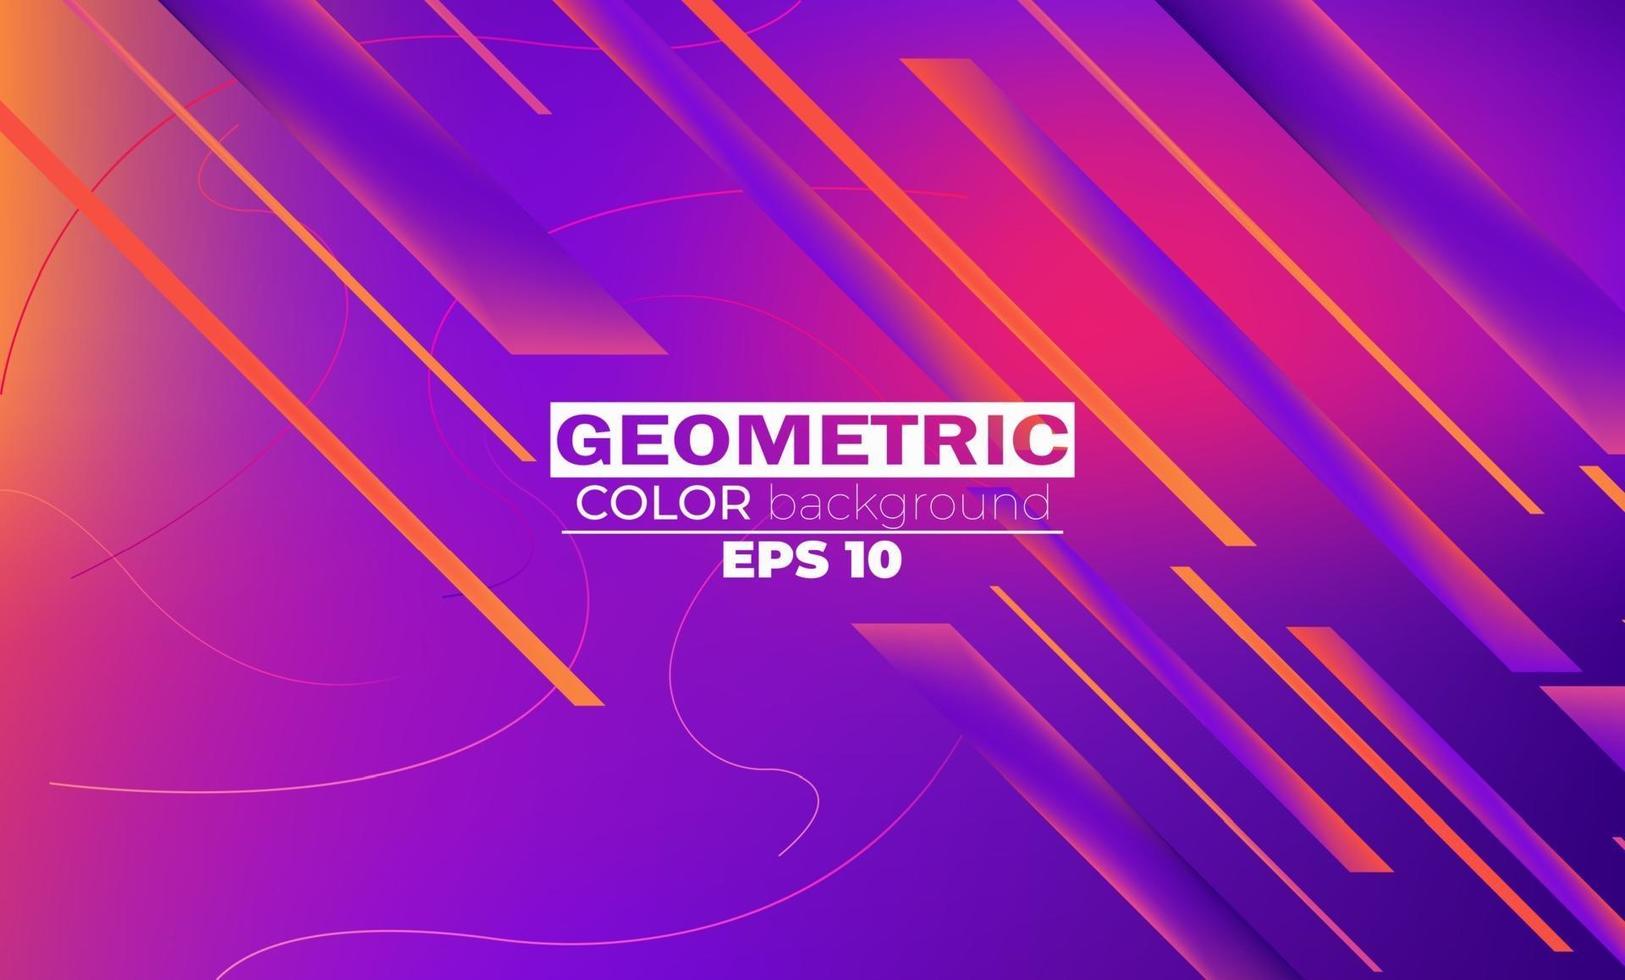 Geometric background with gradient motion shapes composition. Applicable for gift card, poster on wall poster template, landing page, ui, ux, cover book, banner, social media post vector